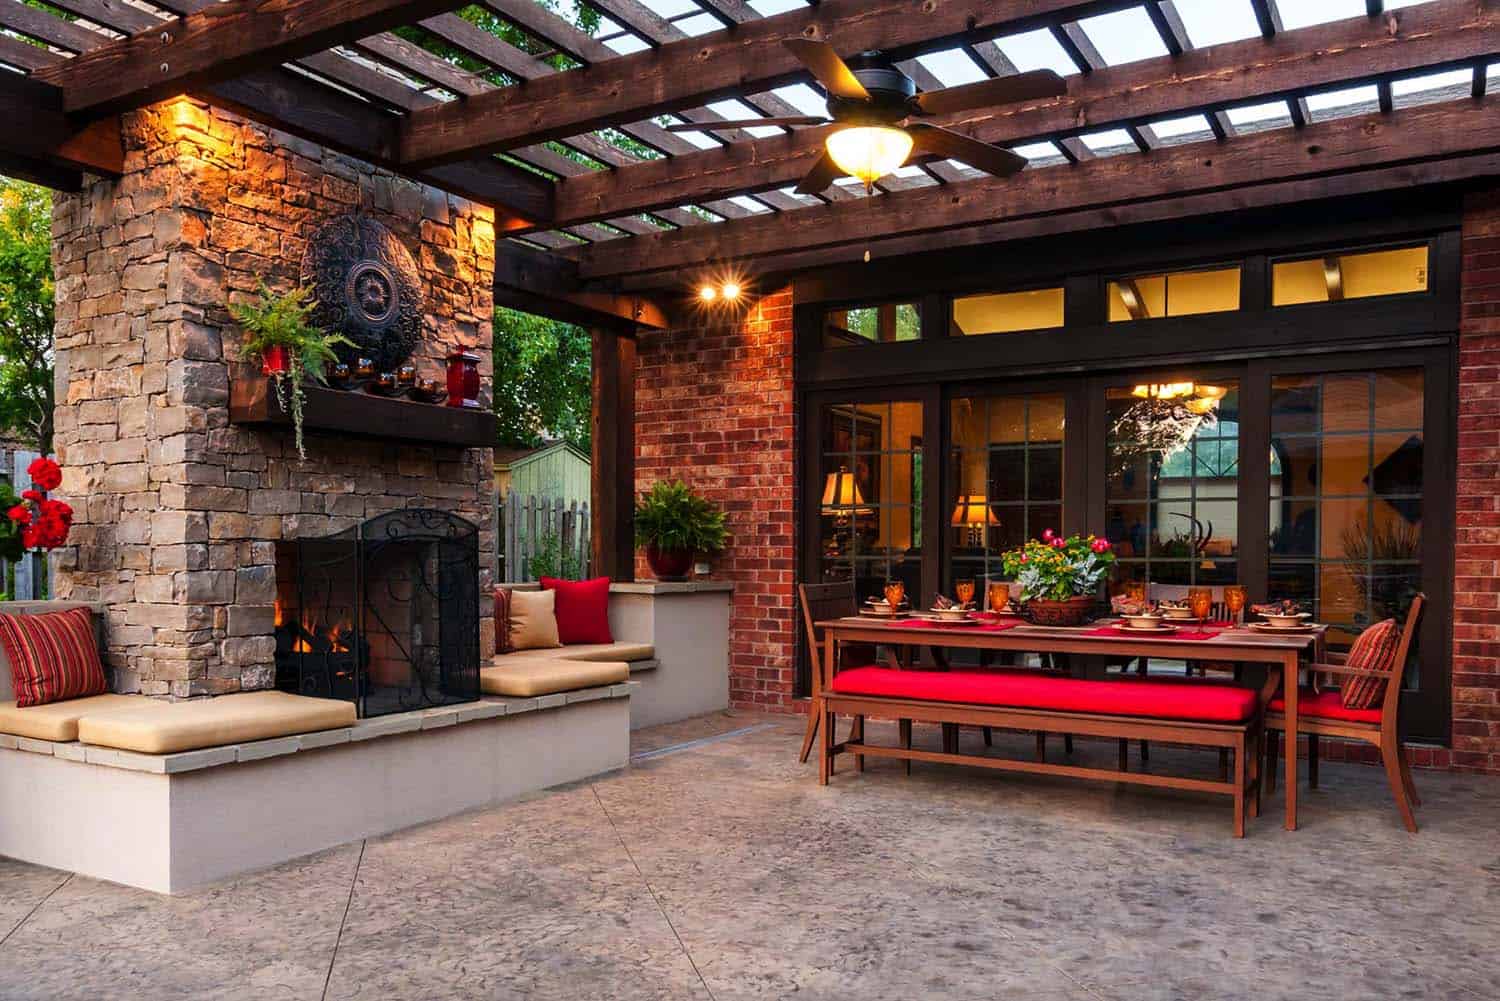 25+ Fabulous outdoor patio ideas to get ready for spring enjoyment